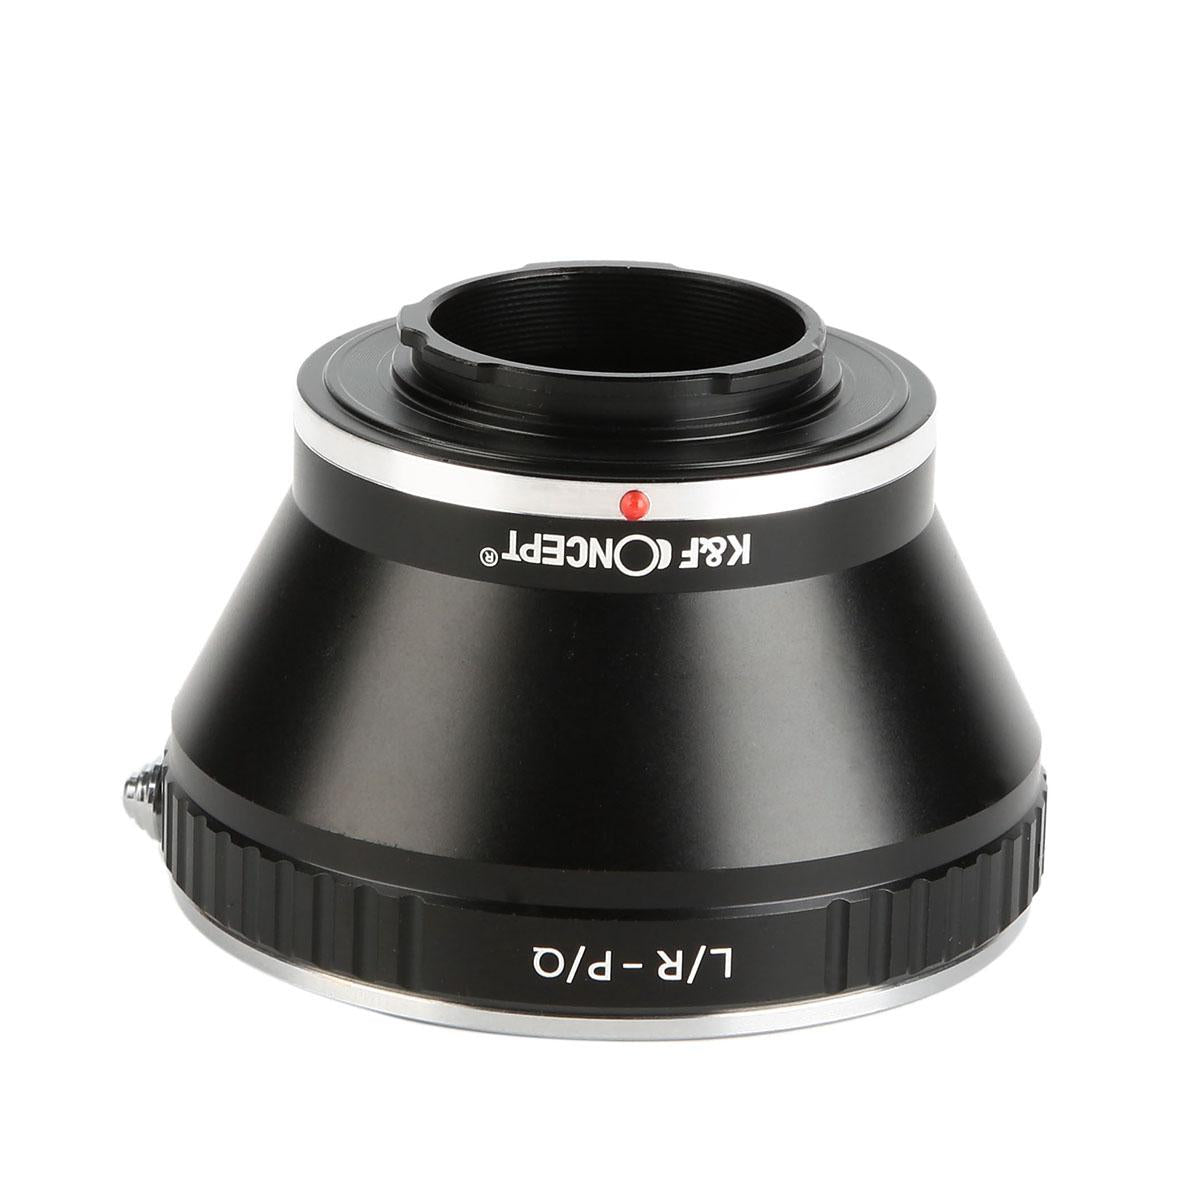 Image of K&F Concept Leica R Lenses to Pentax Q Camera Mount Adapter with Tripod Mount